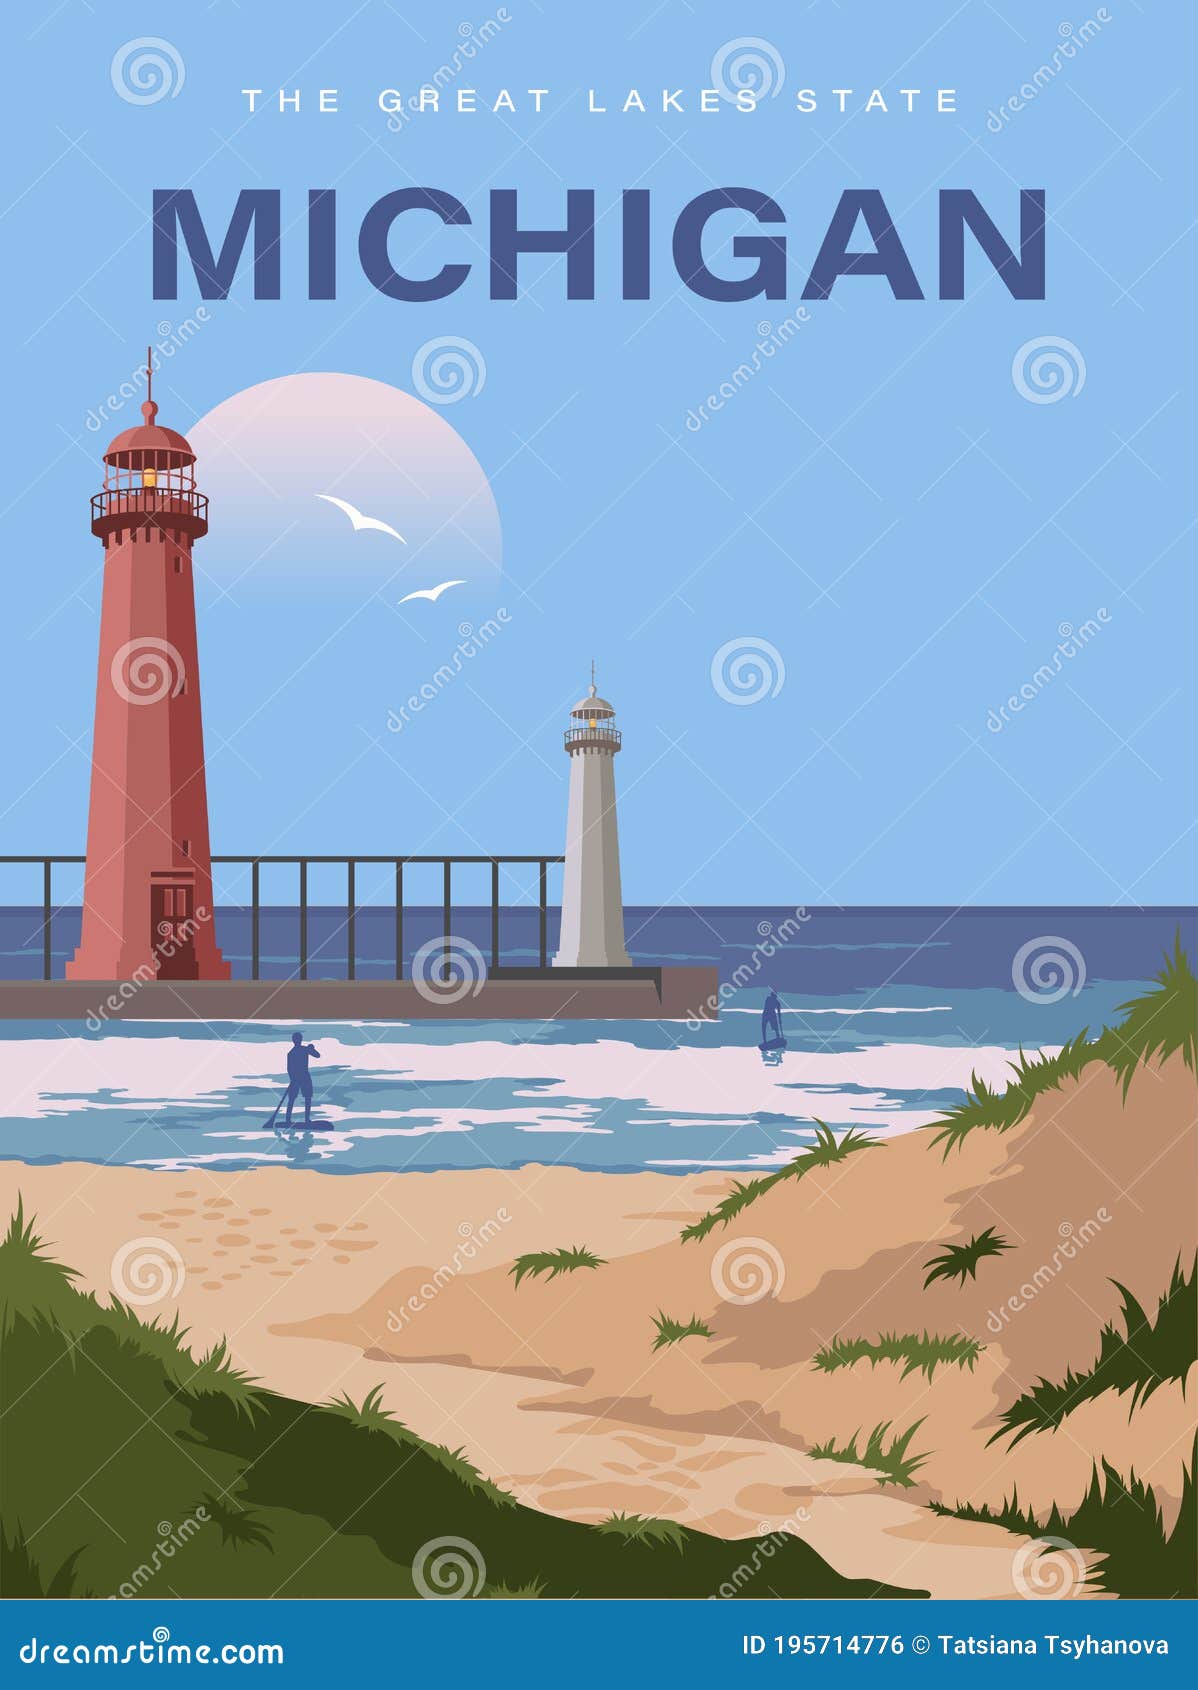 michigan. the great lakes state. touristic banner in 